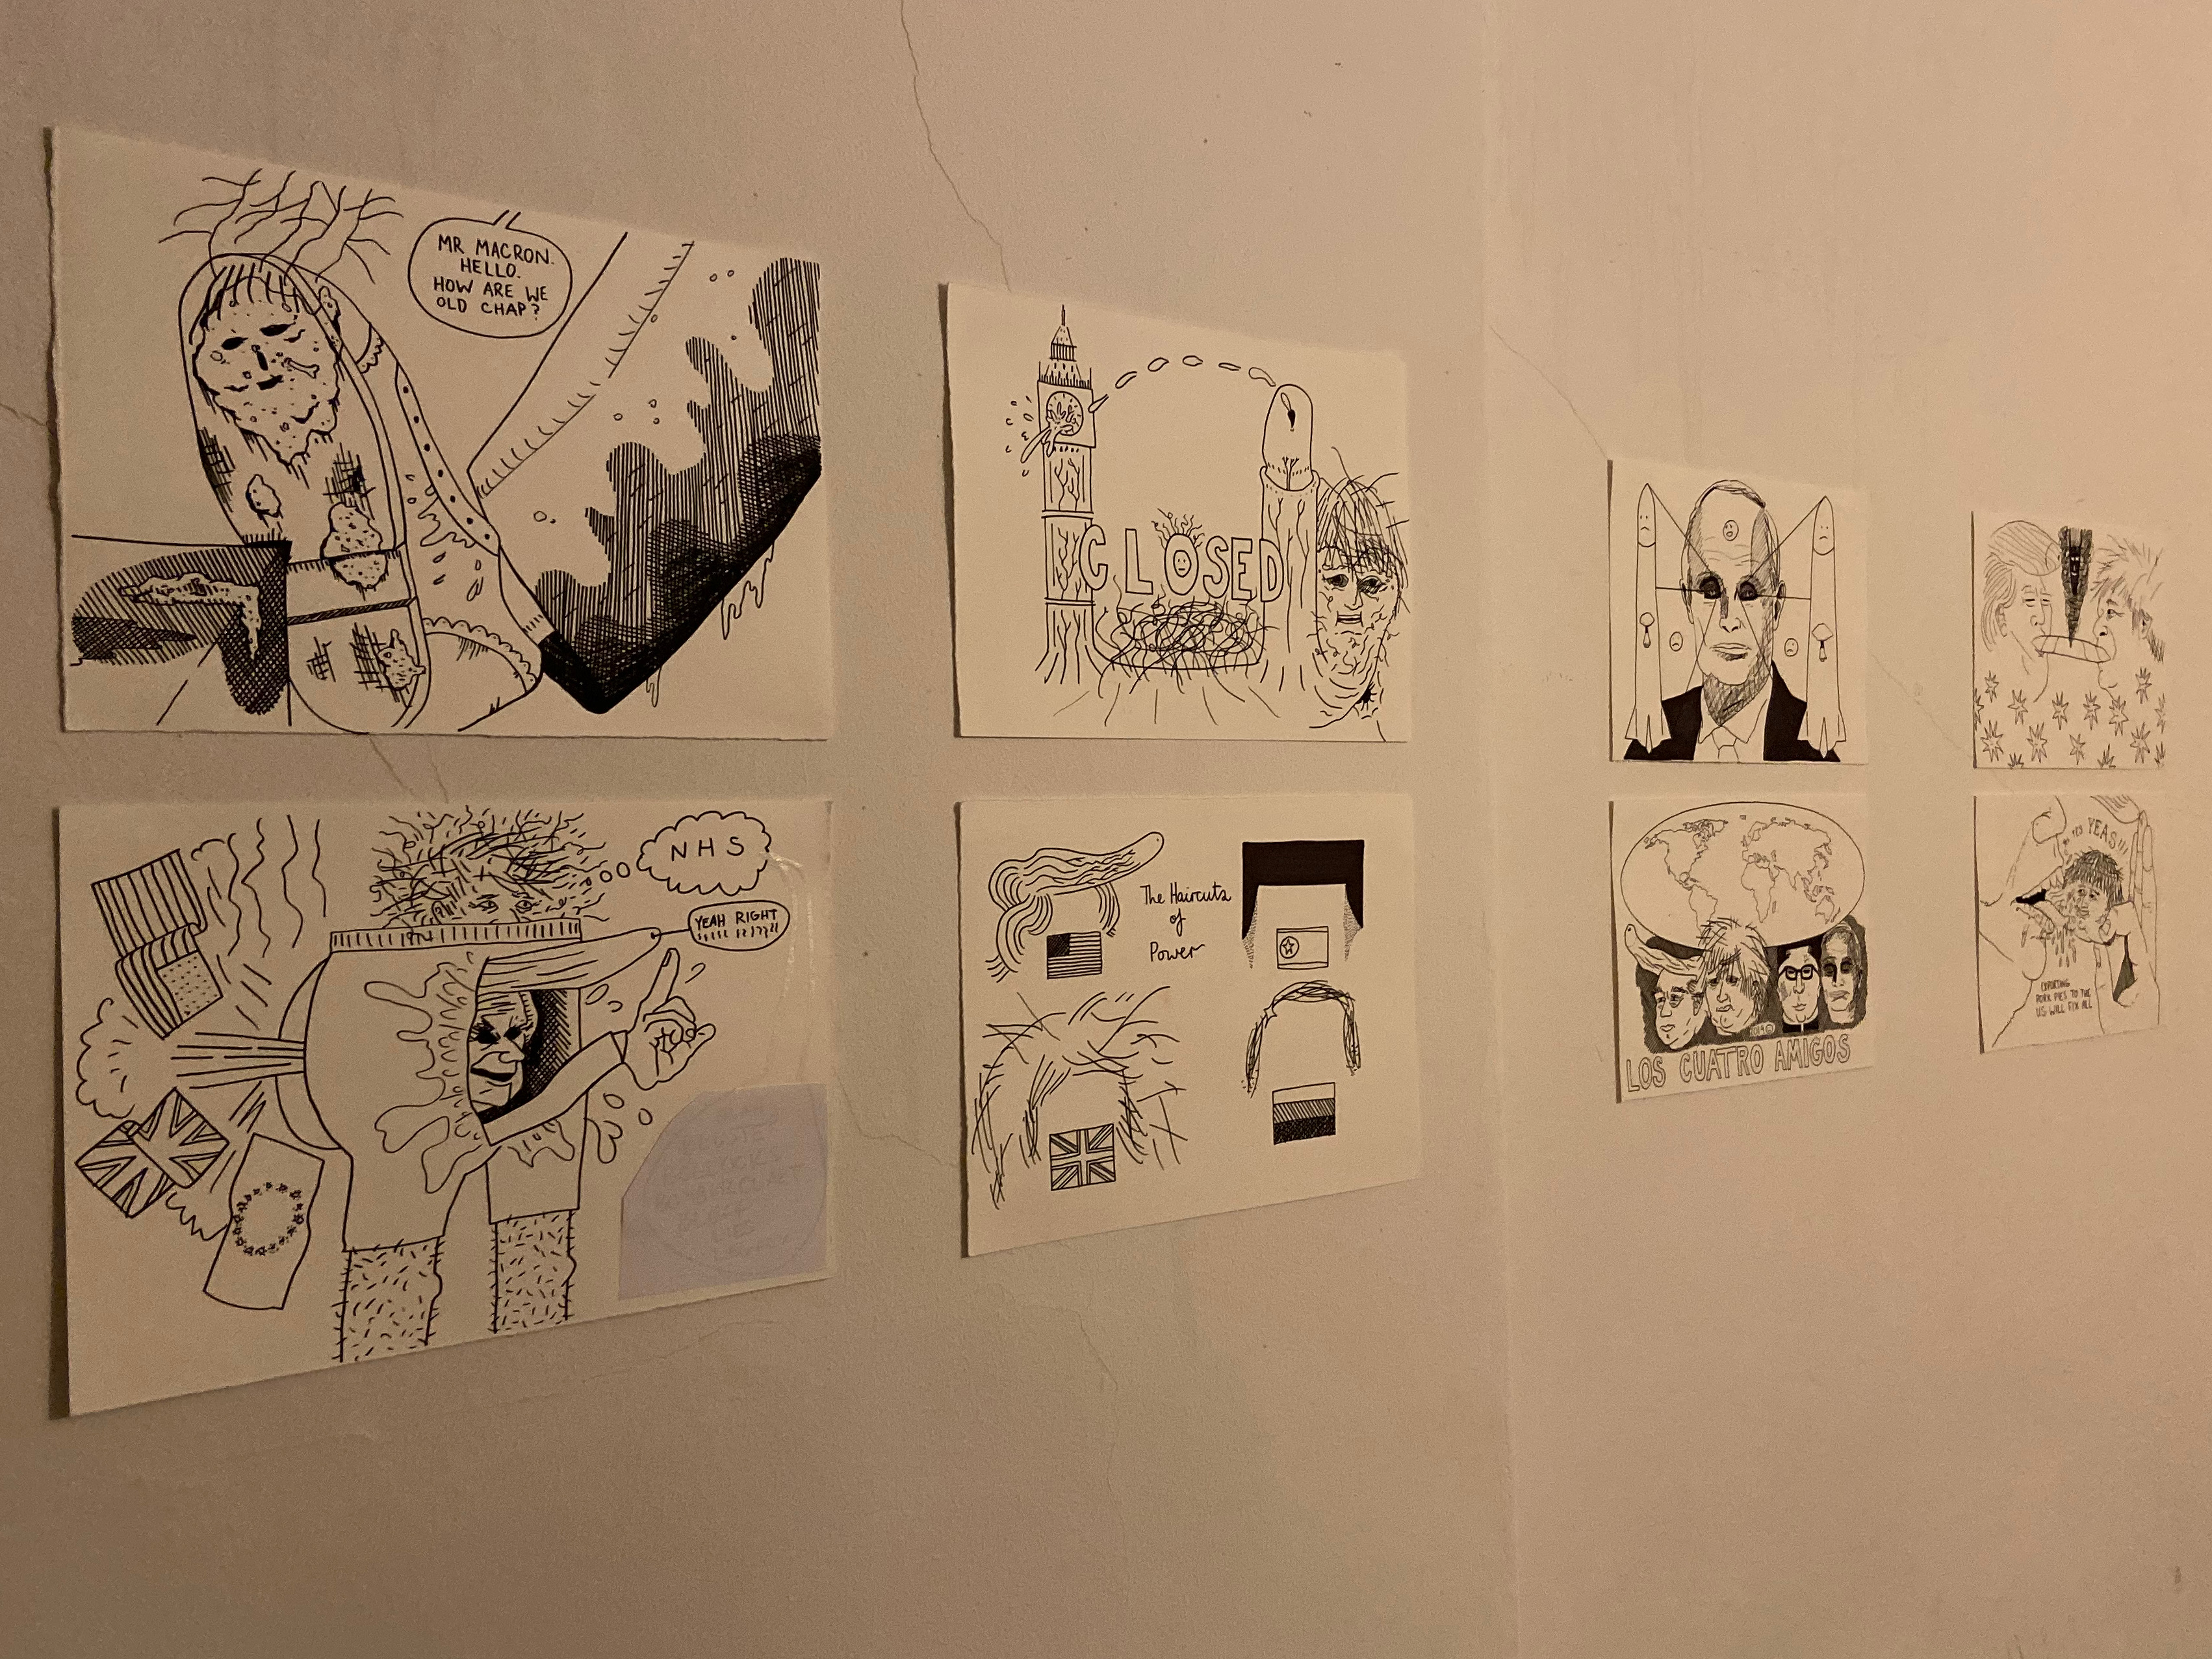 Caricatures are drawn on small pieces of paper and stuck on a toilet wall